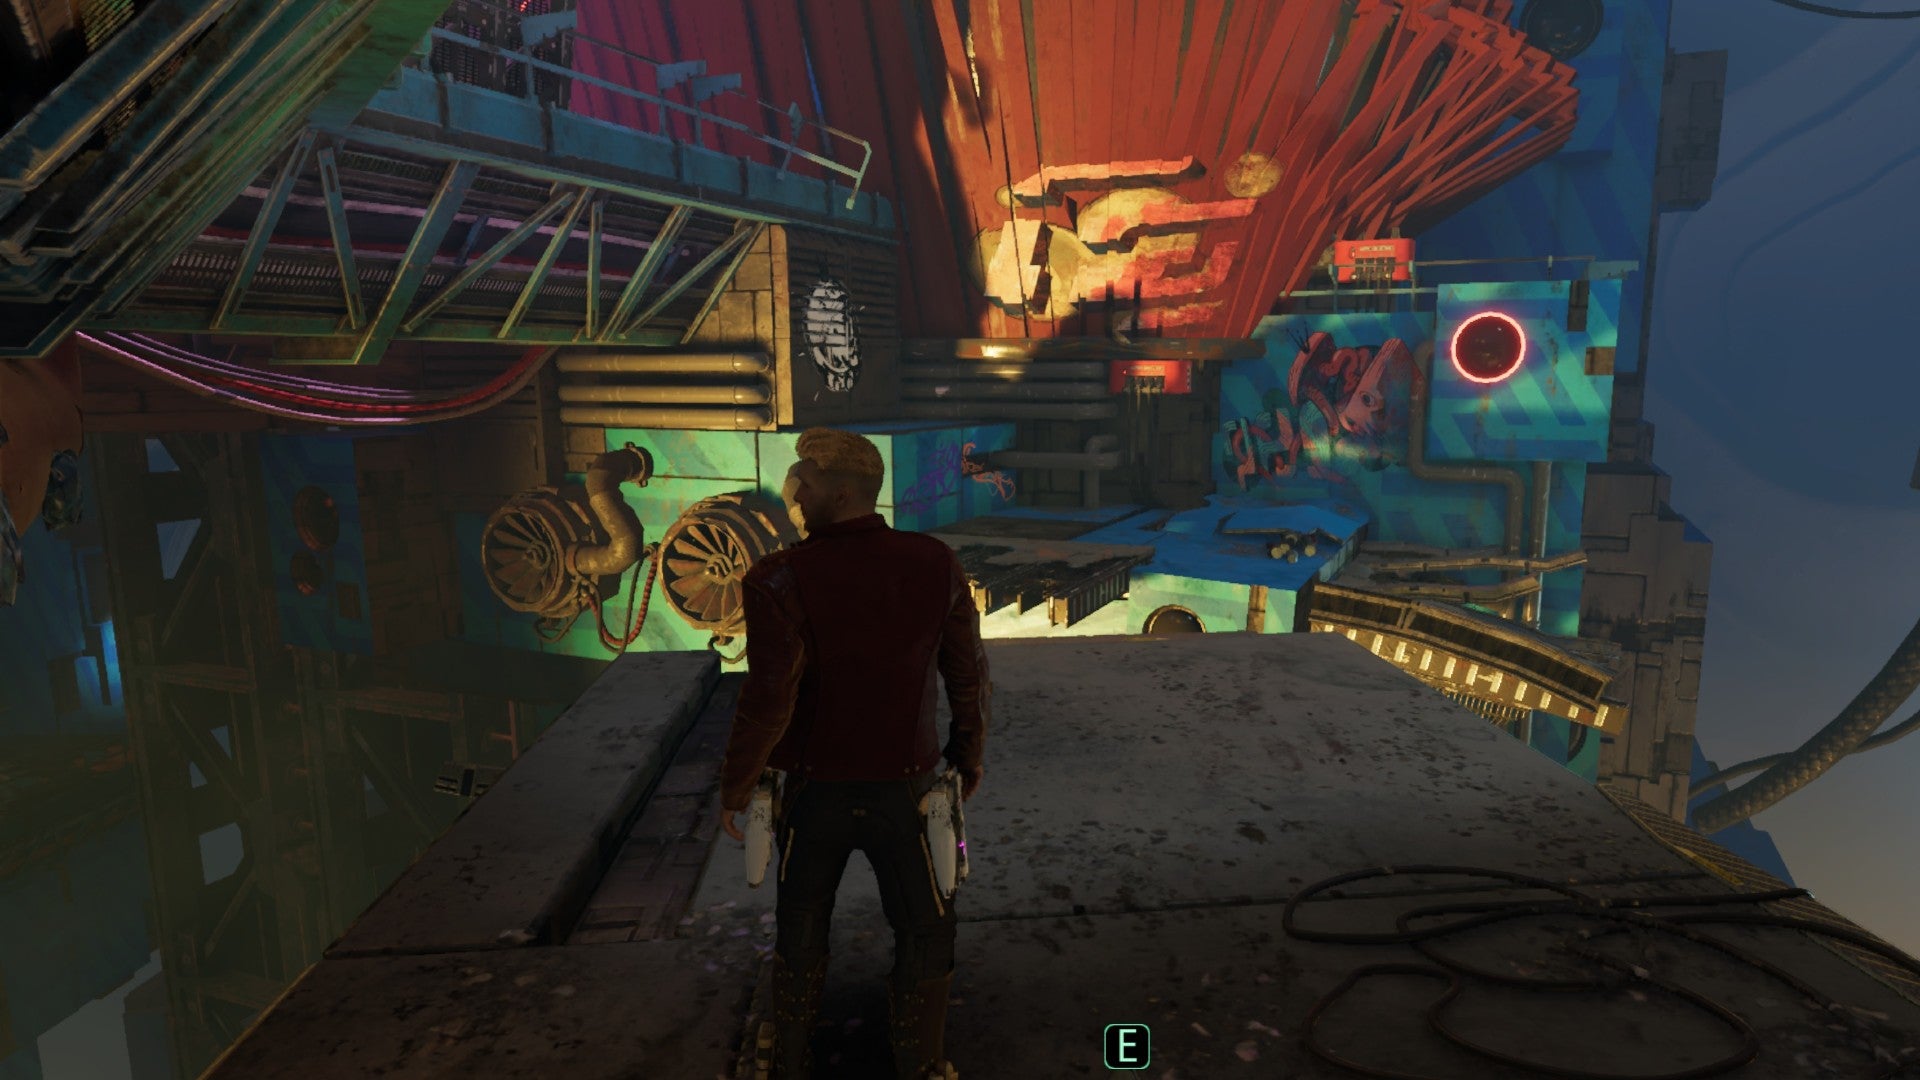 Star-Lord stood on platform staring across at more platforms surrounded by graffiti